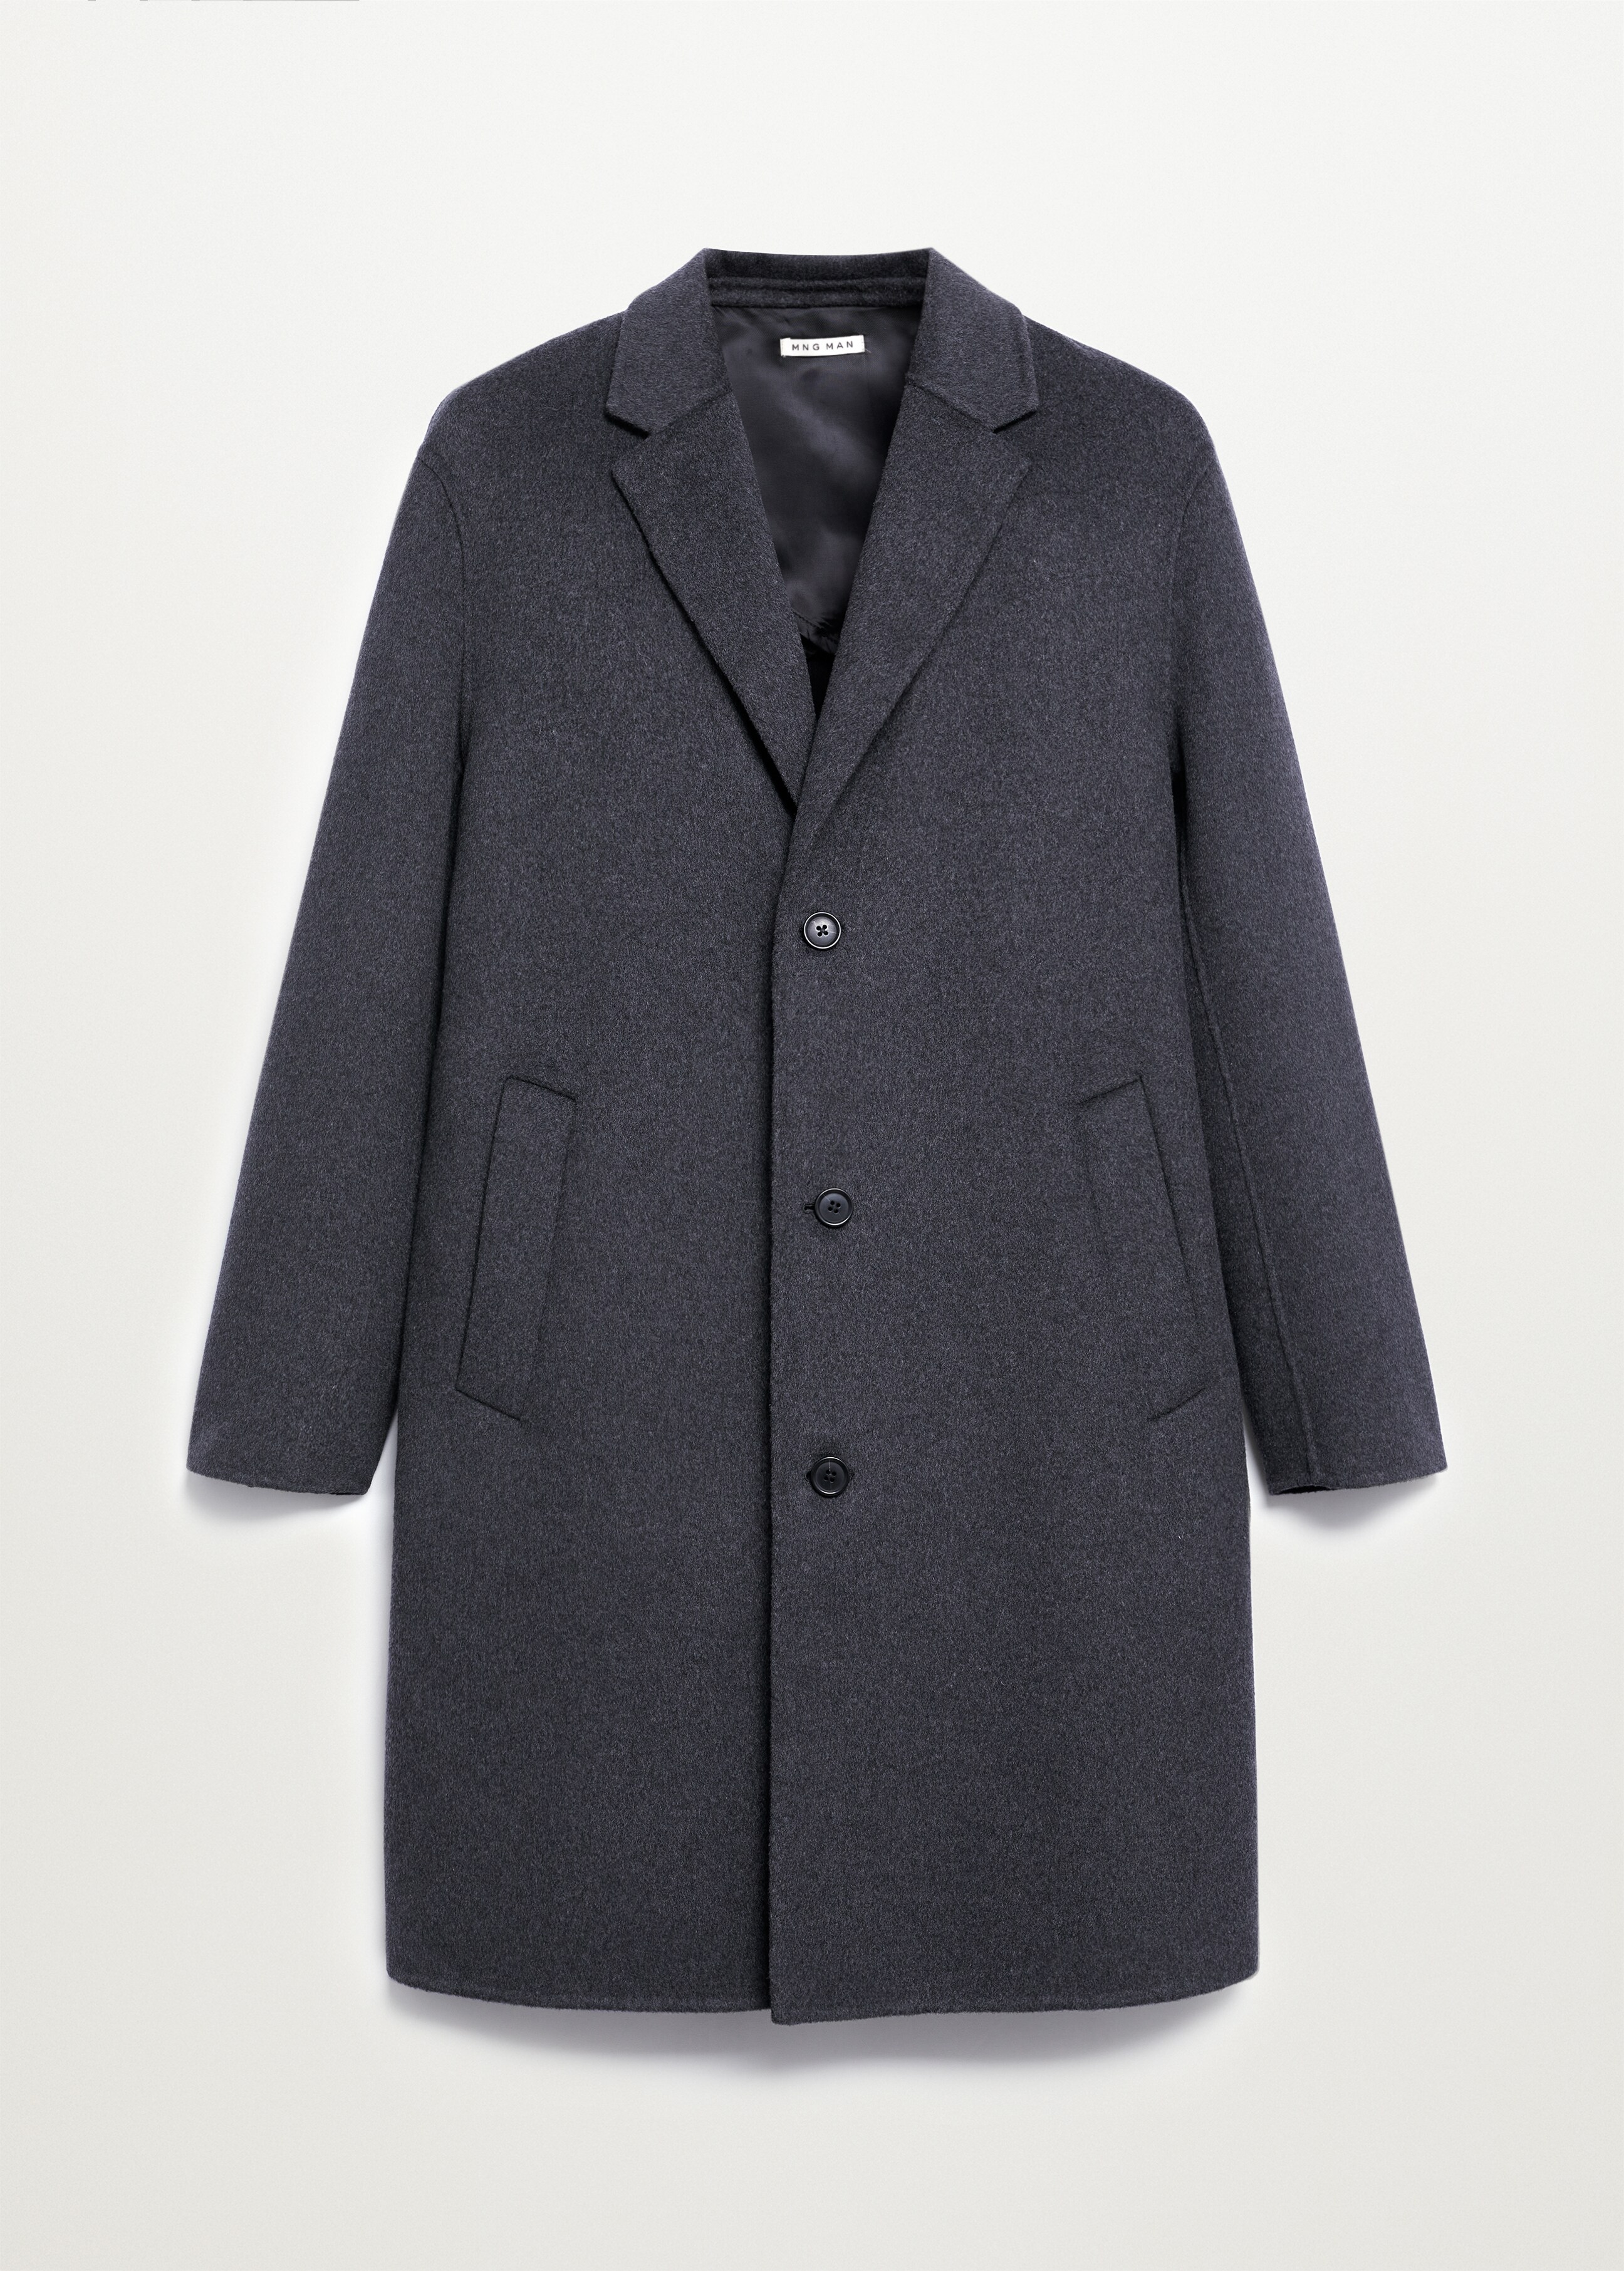 Handmade recycled wool coat - Article without model